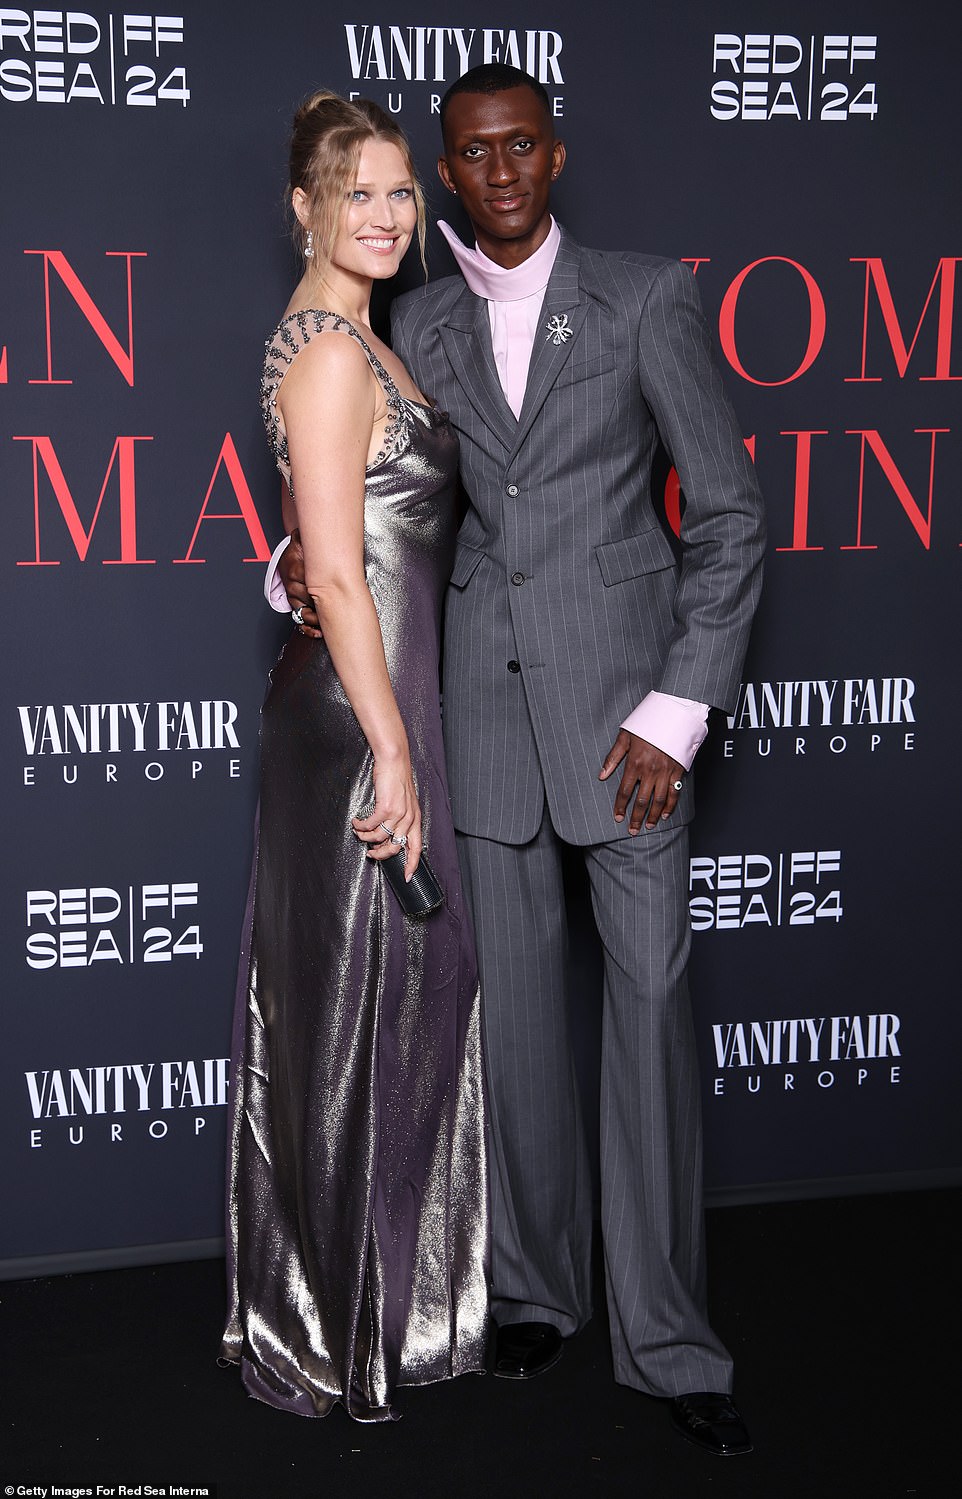 Toni Garrn, 31, and Alioune Badara, 34, were a stylish pair as they modeled complementing, pale purple outfits. The Senegalese footballer wore a gray, pinstriped blazer with matching trousers, which he paired with a light purple button-down with a dramatic swoop collar